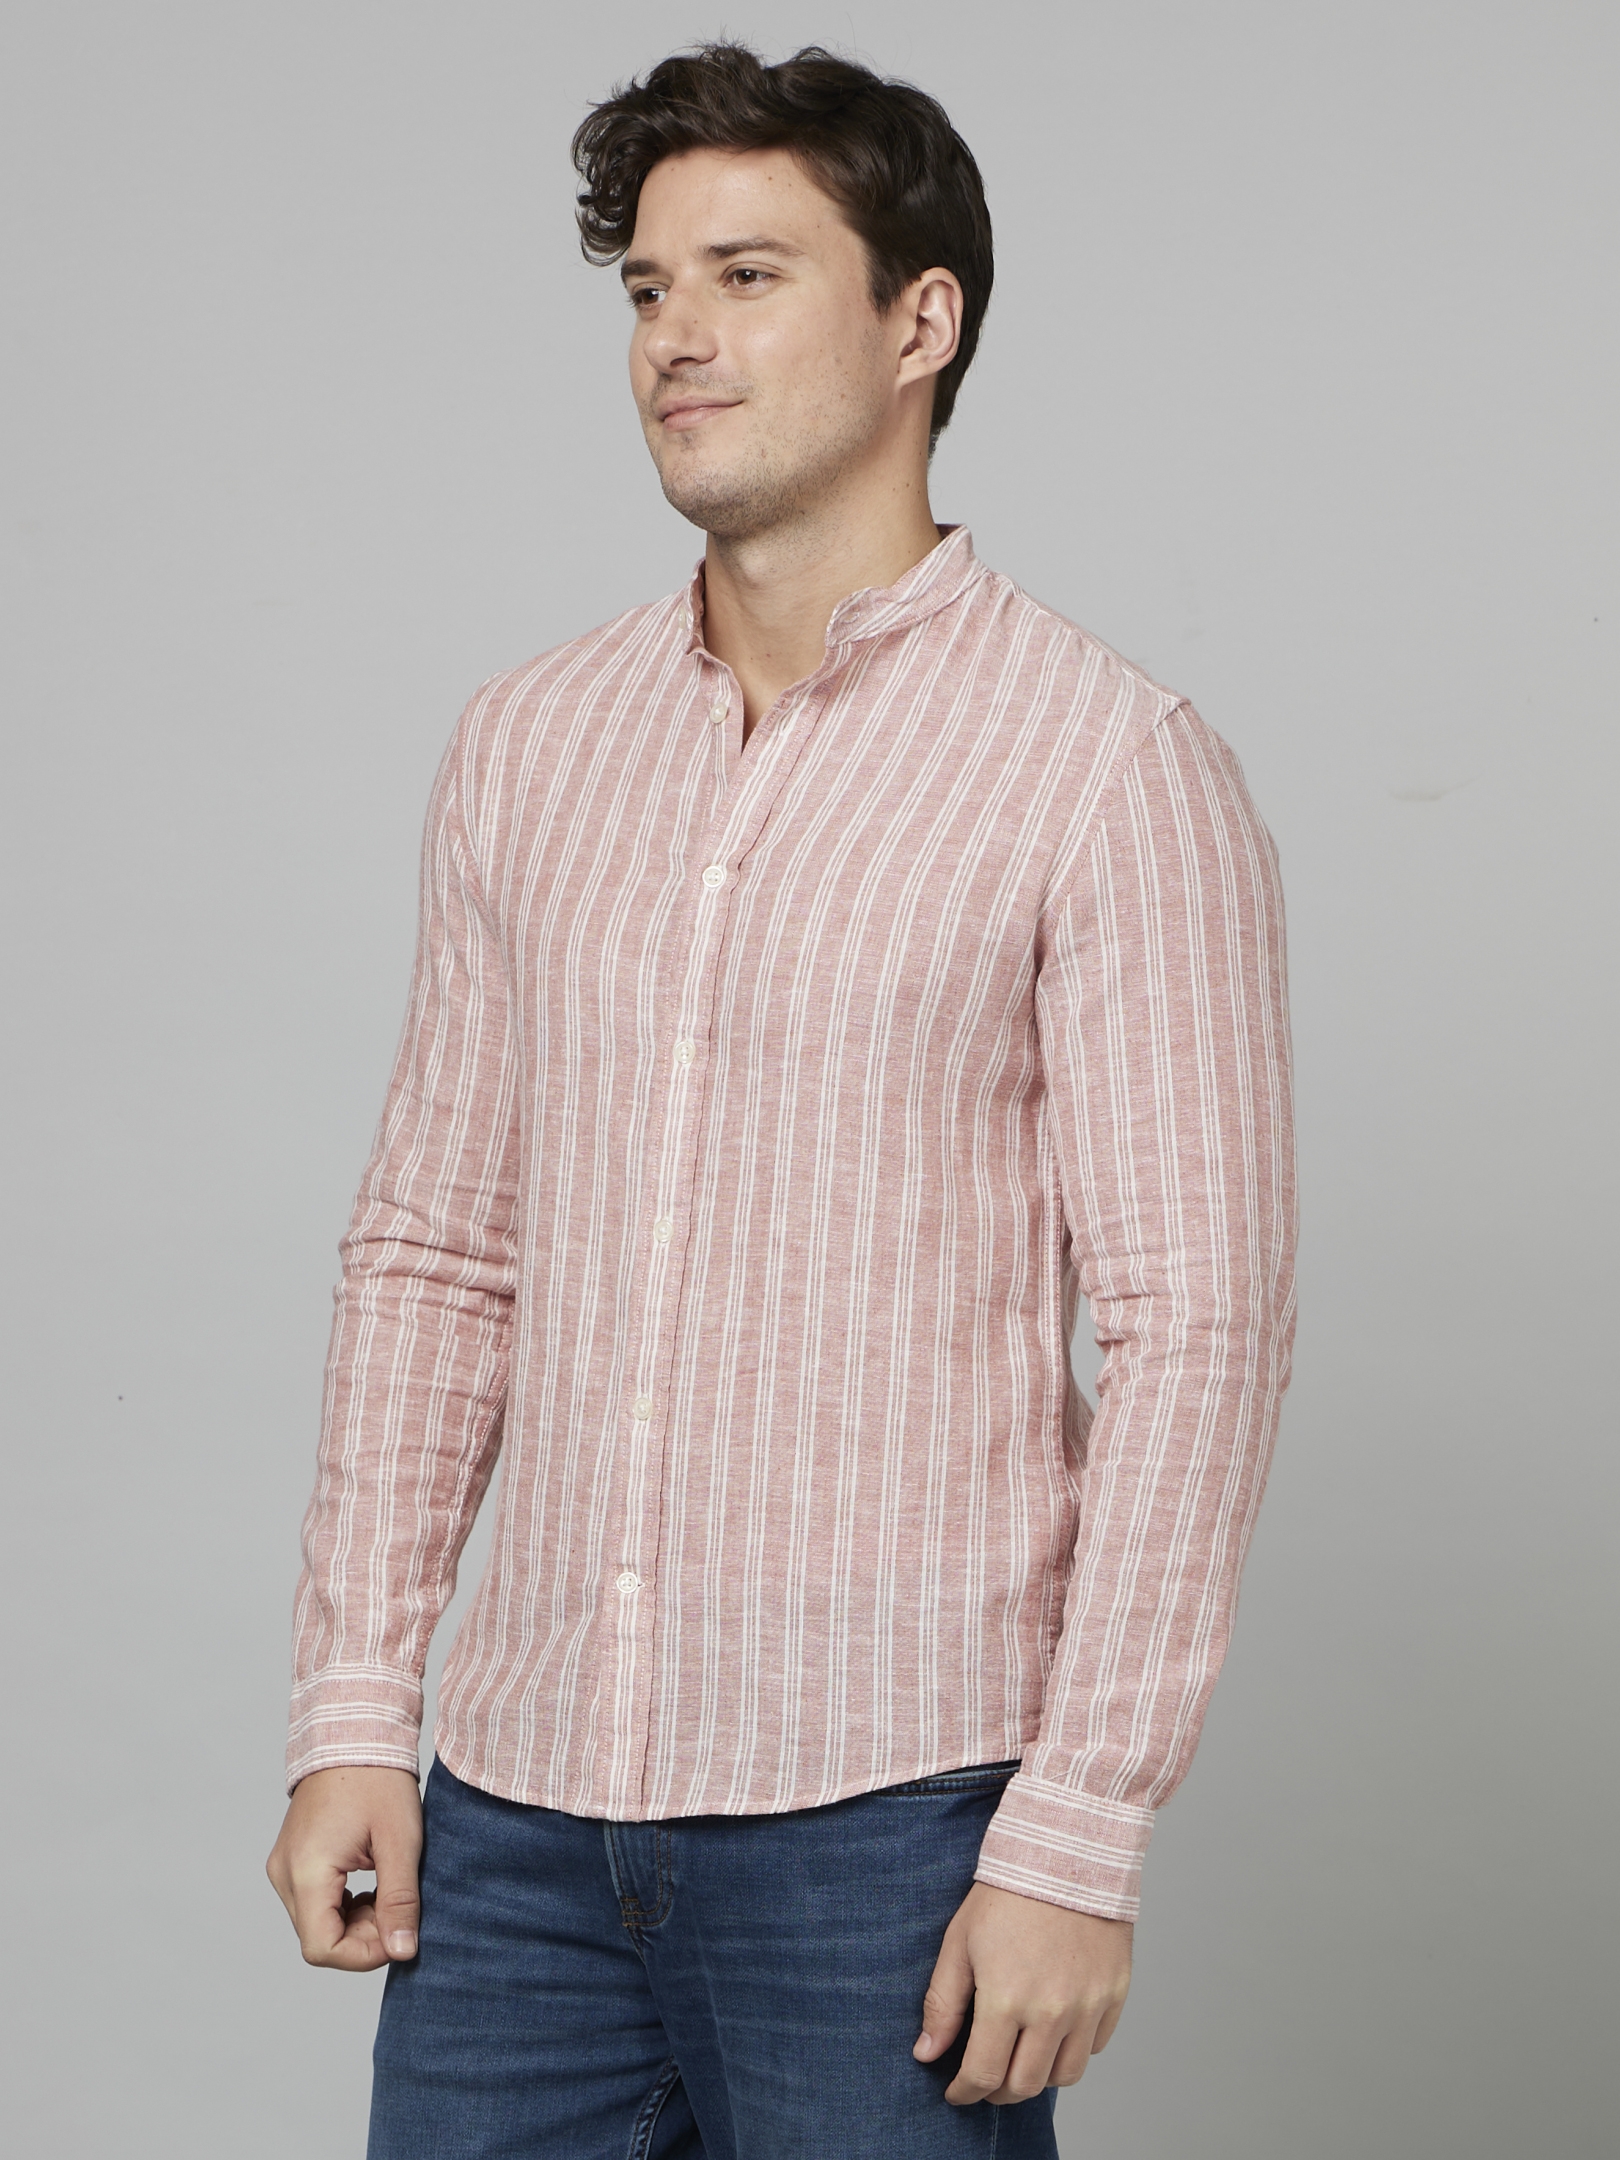 Men's Red Striped Casual Shirts